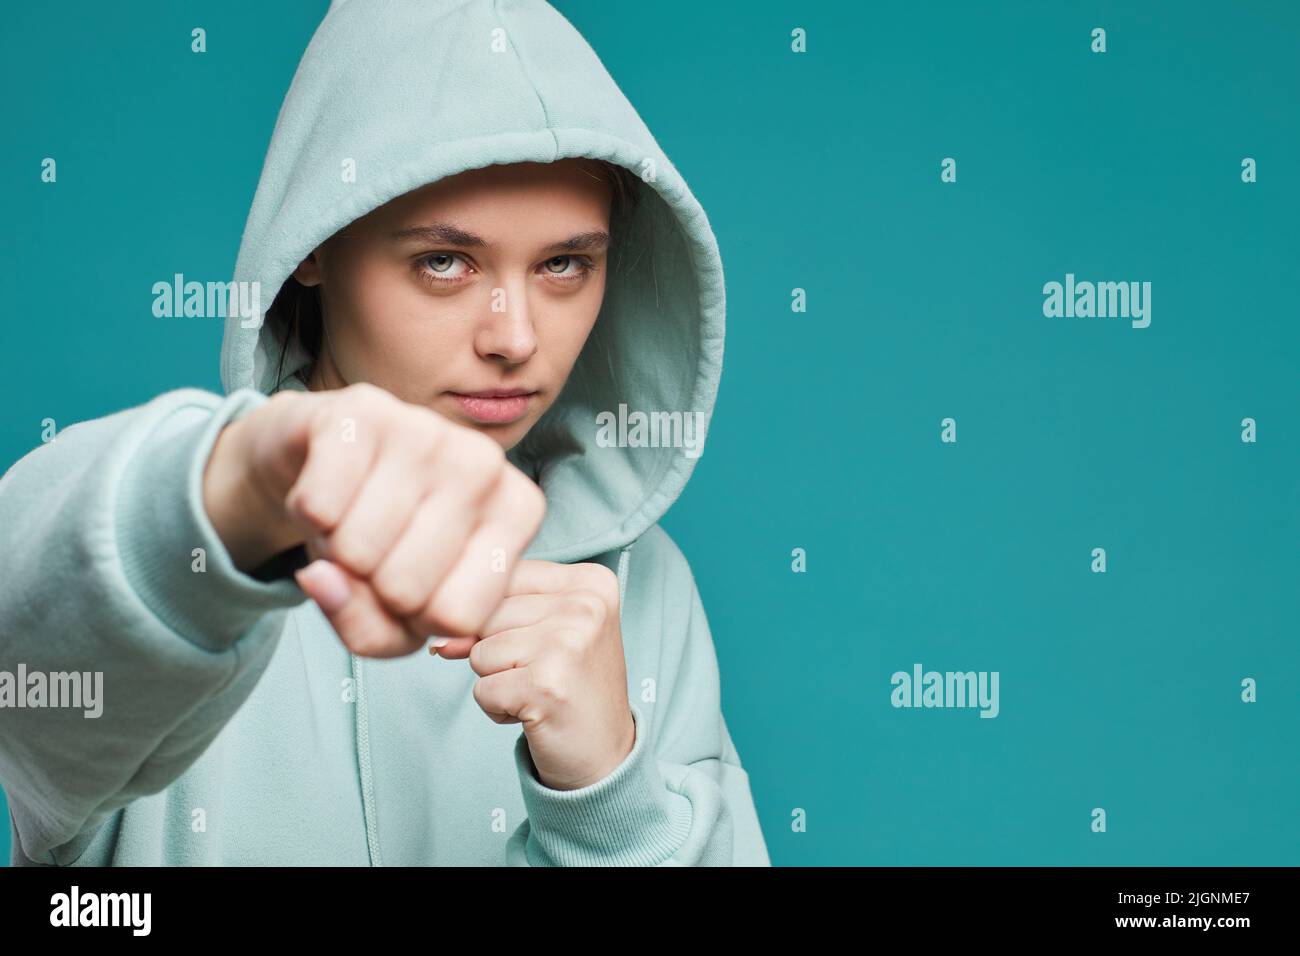 Portrait of serious female fighter in teal hoodie punching at camera while preparing for fight, isolated background Stock Photo